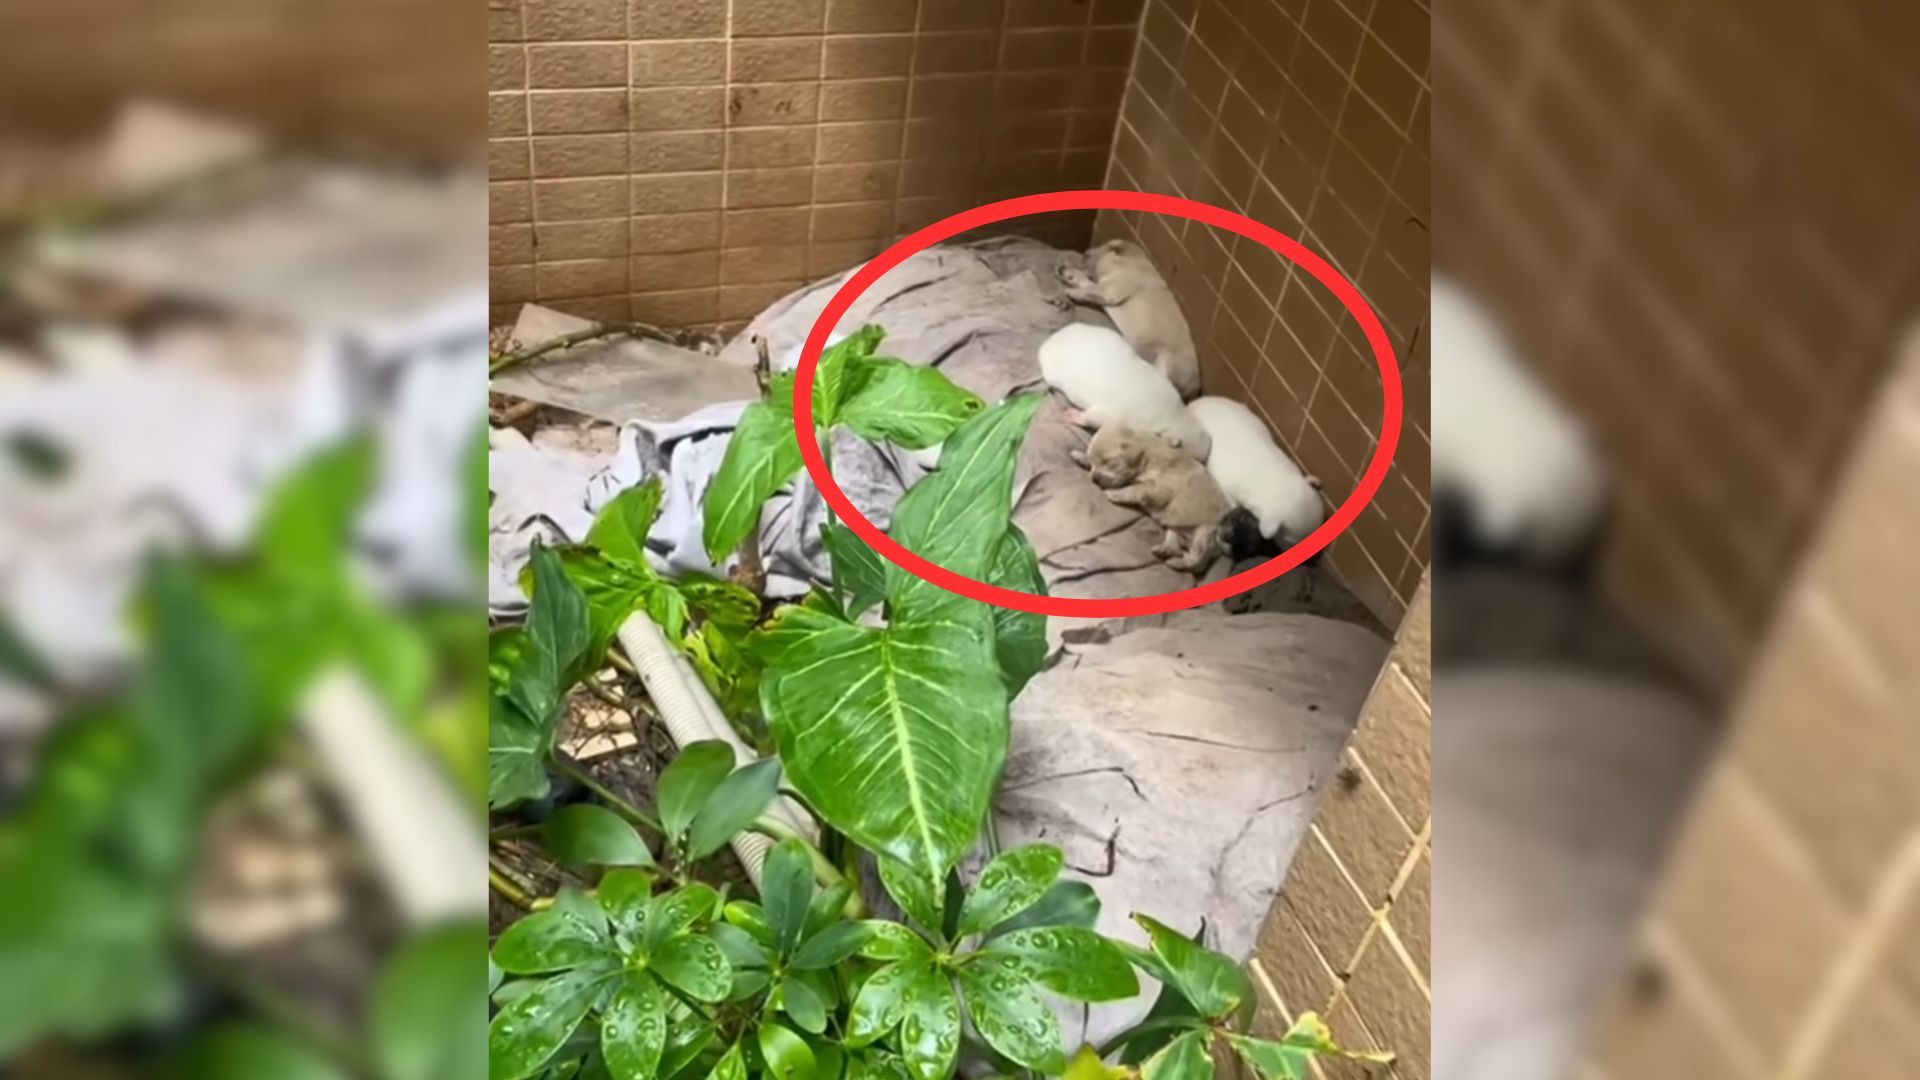 Residents Heartbroken To Find An Entire Dog Family Living Behind Their Building